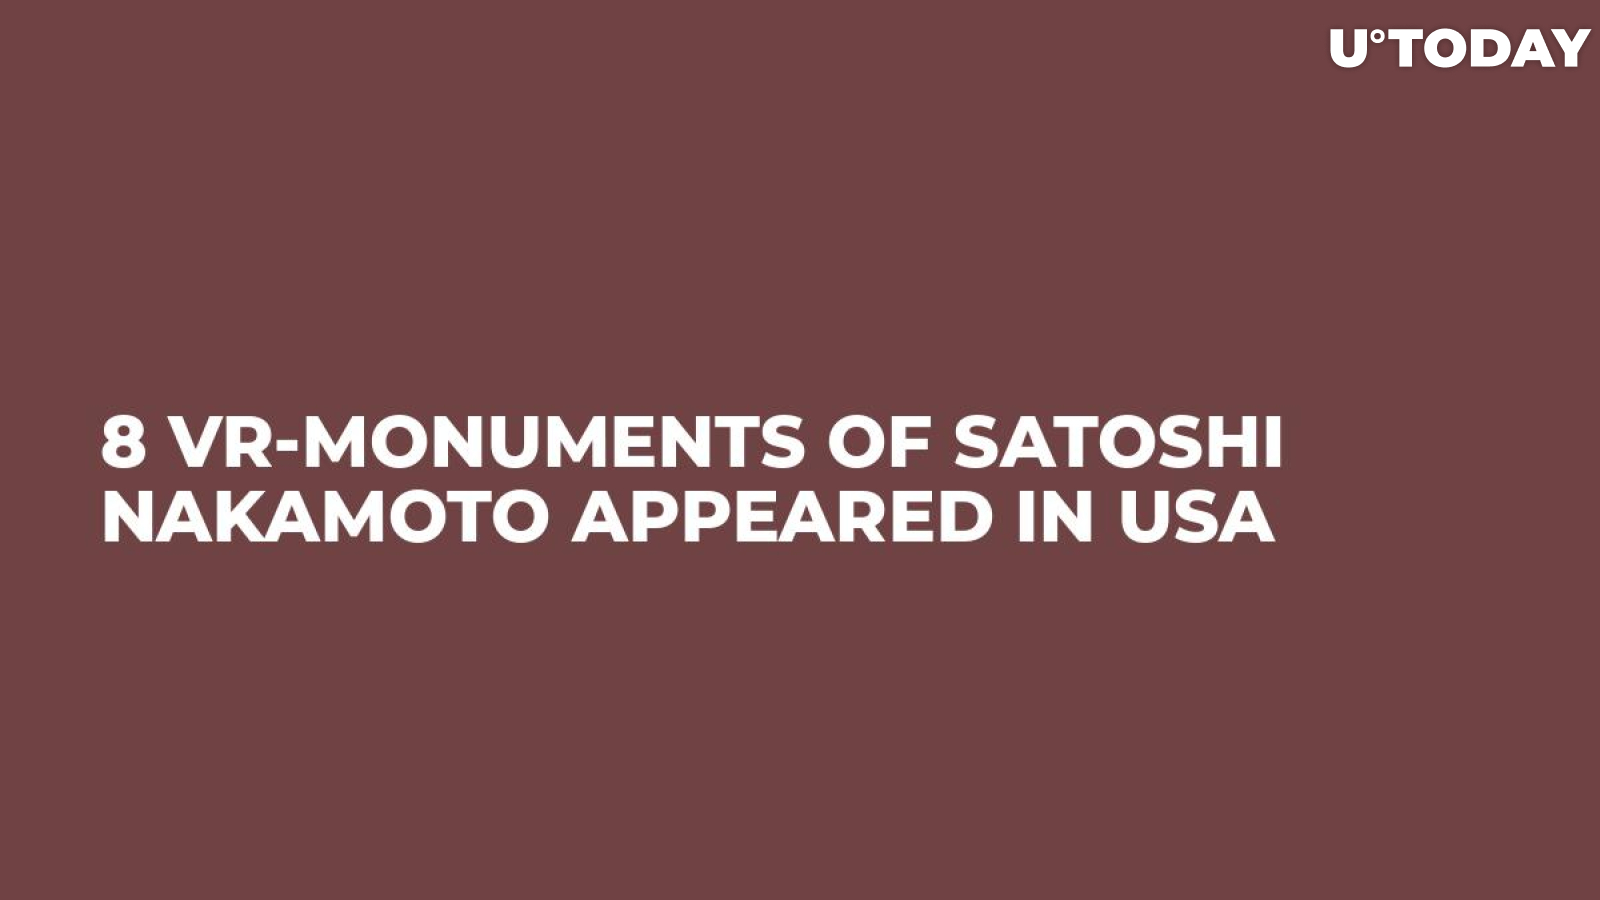 8 VR-monuments Of Satoshi Nakamoto Appeared In USA